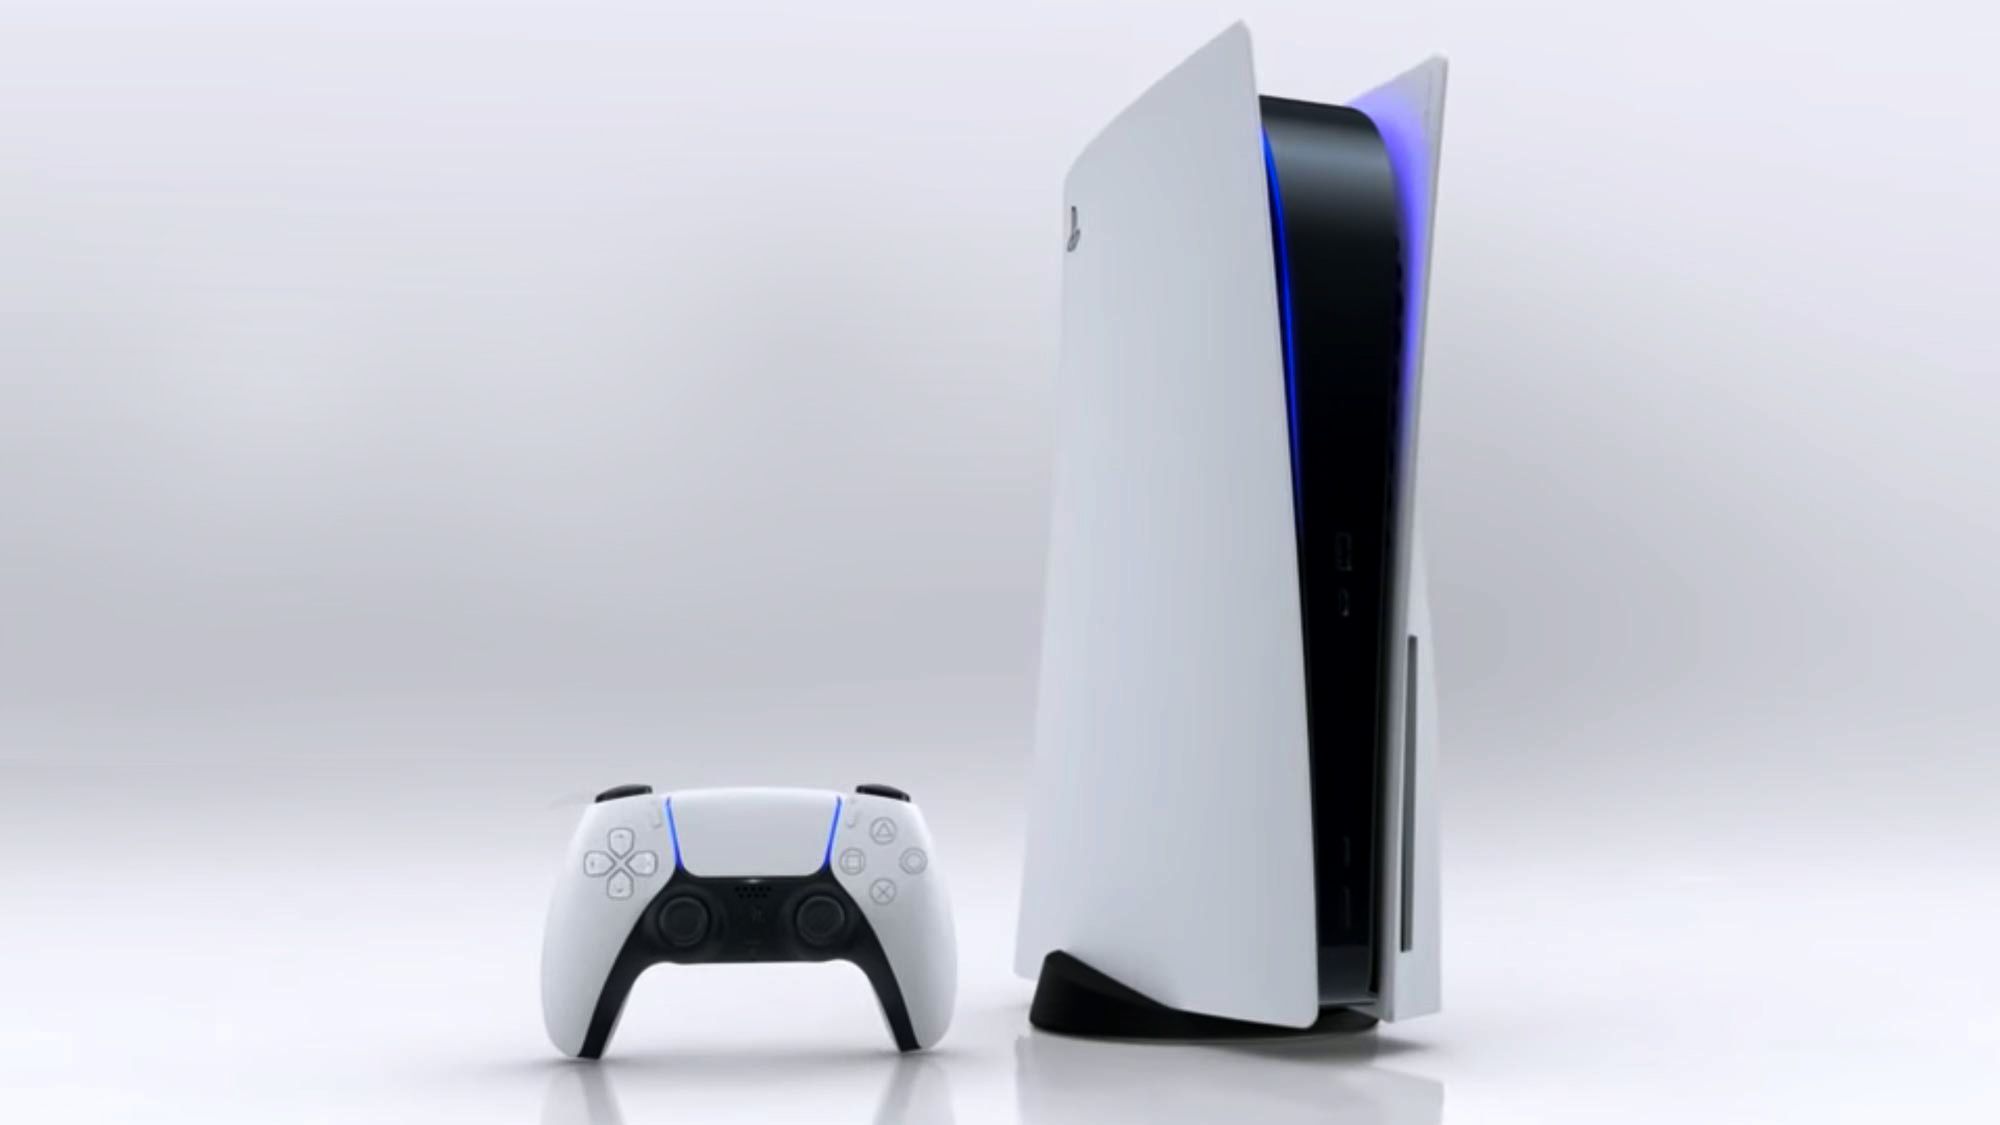 playstation 5 standing vertically